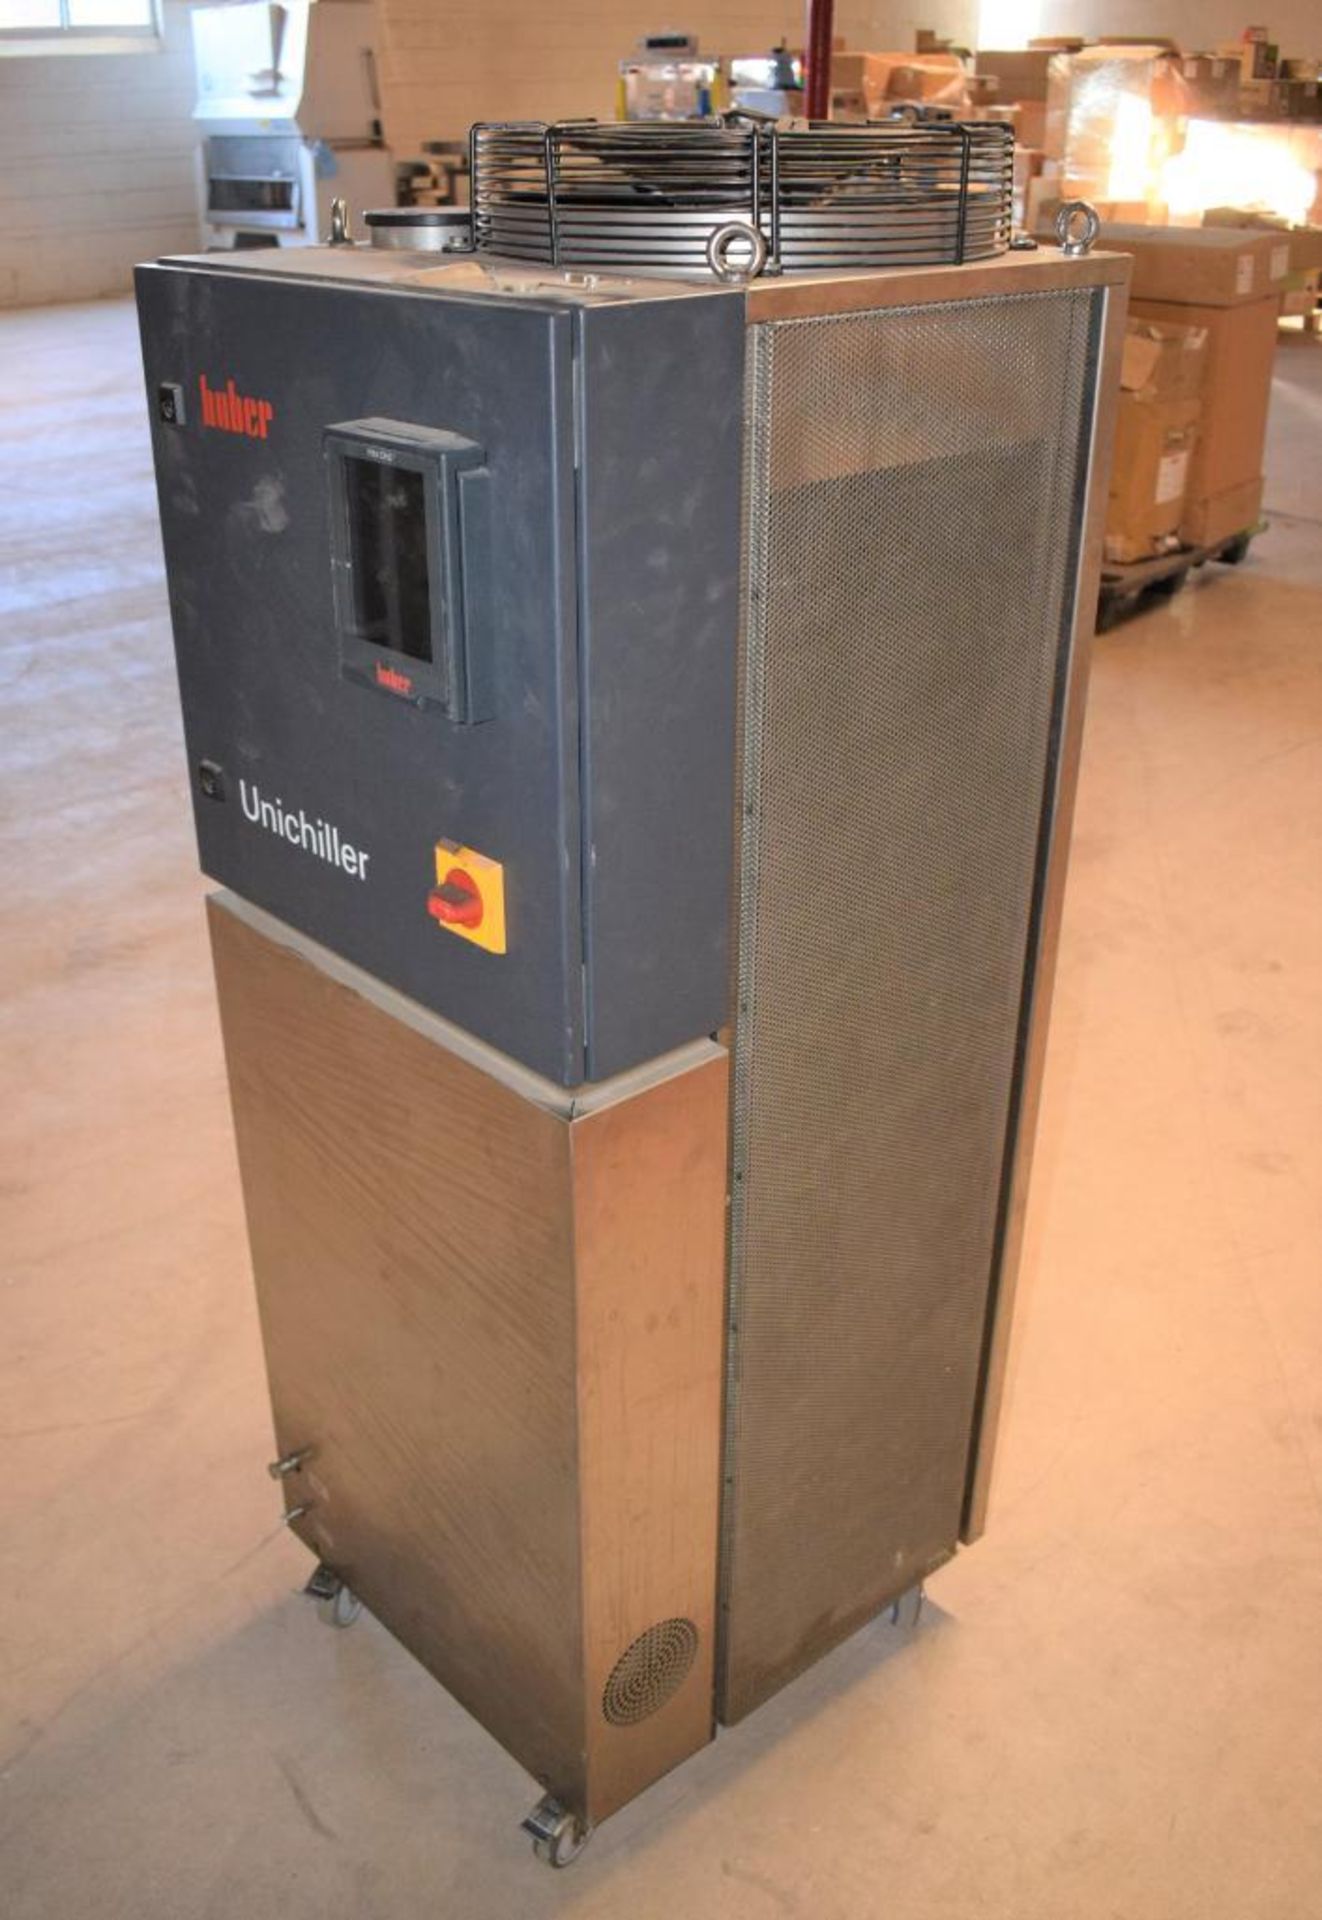 Huber Air Cooled Unichiller, Model 040T. Approximate operating temperature range -10 to +40 degrees - Image 2 of 7